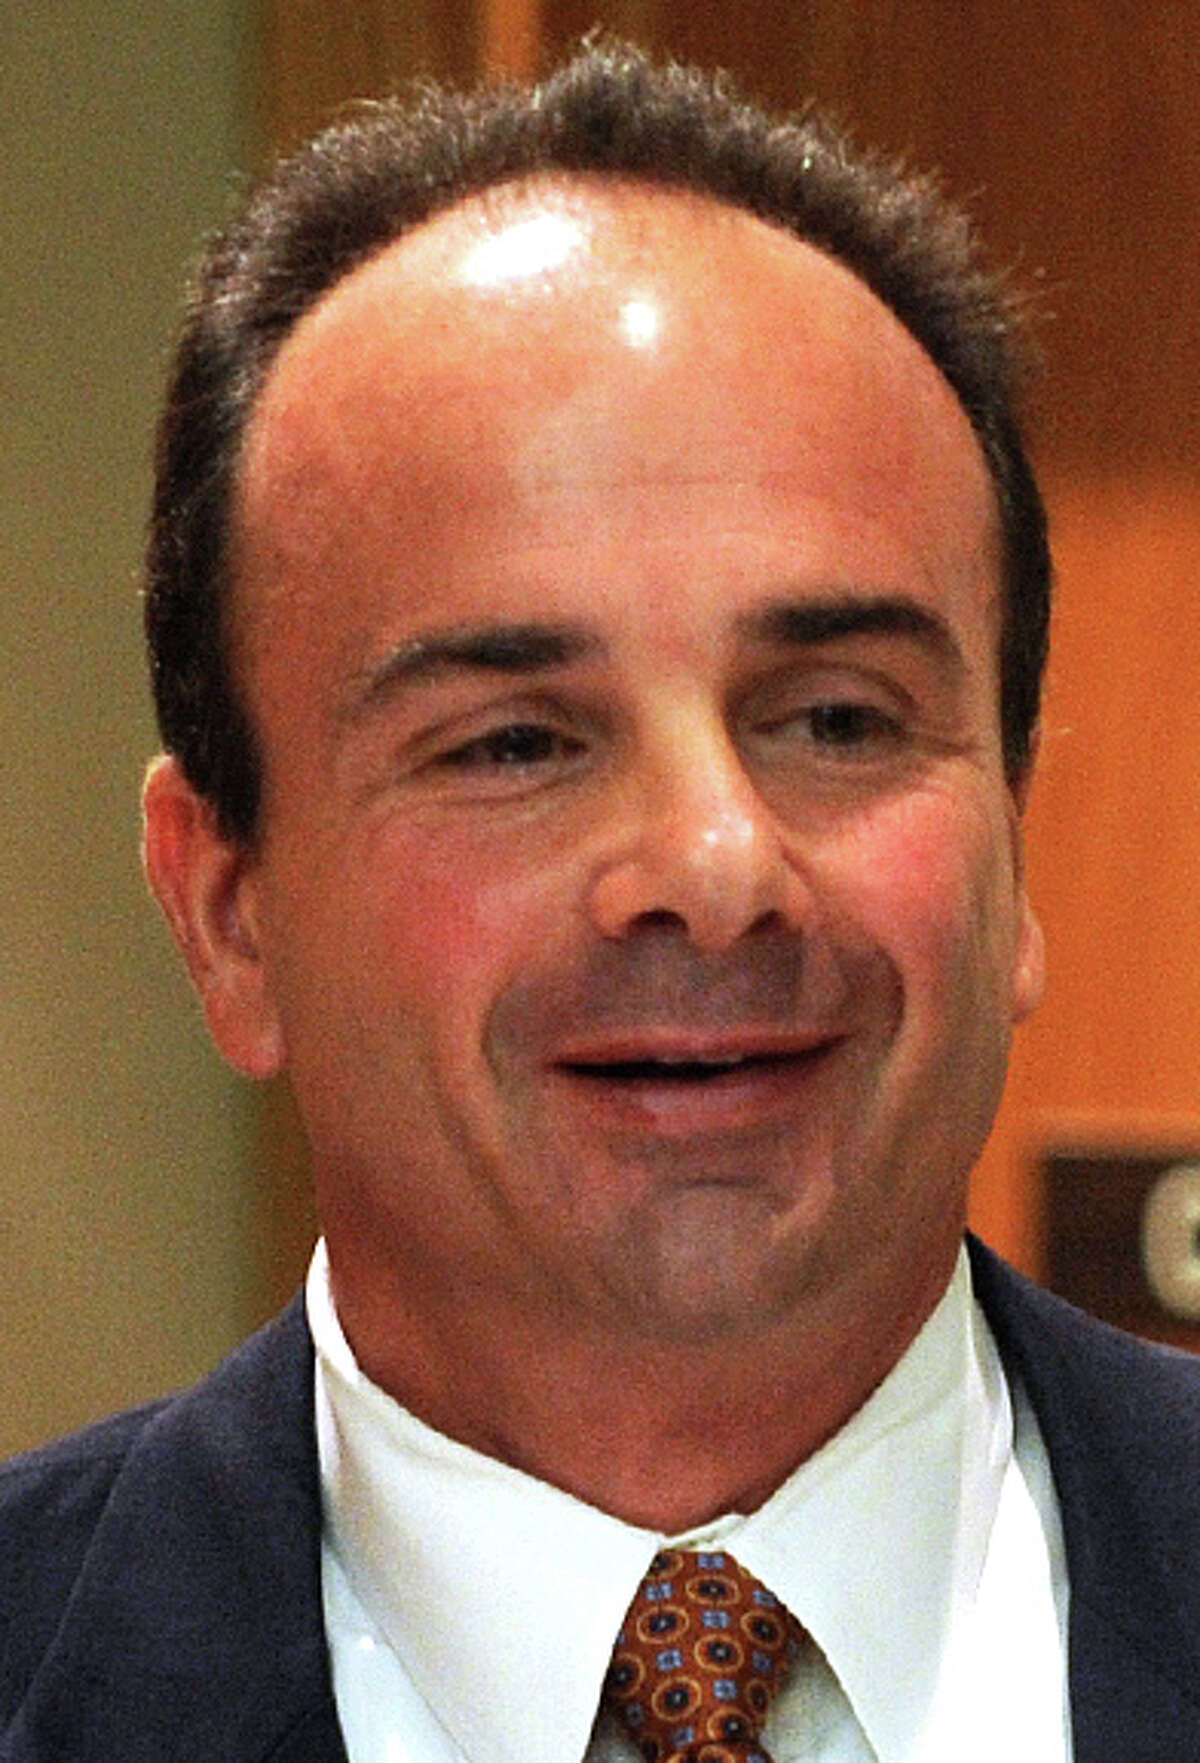 Former Bridgeport Mayor Joseph Ganim, center, and his attorneys Harold Rosnick, left, and George Ganim, right, in Bridgeport, Conn. Sept. 11th, 2012. Ganim appeared in front of a three judge panel Tuesday in his effort to regain his law license.